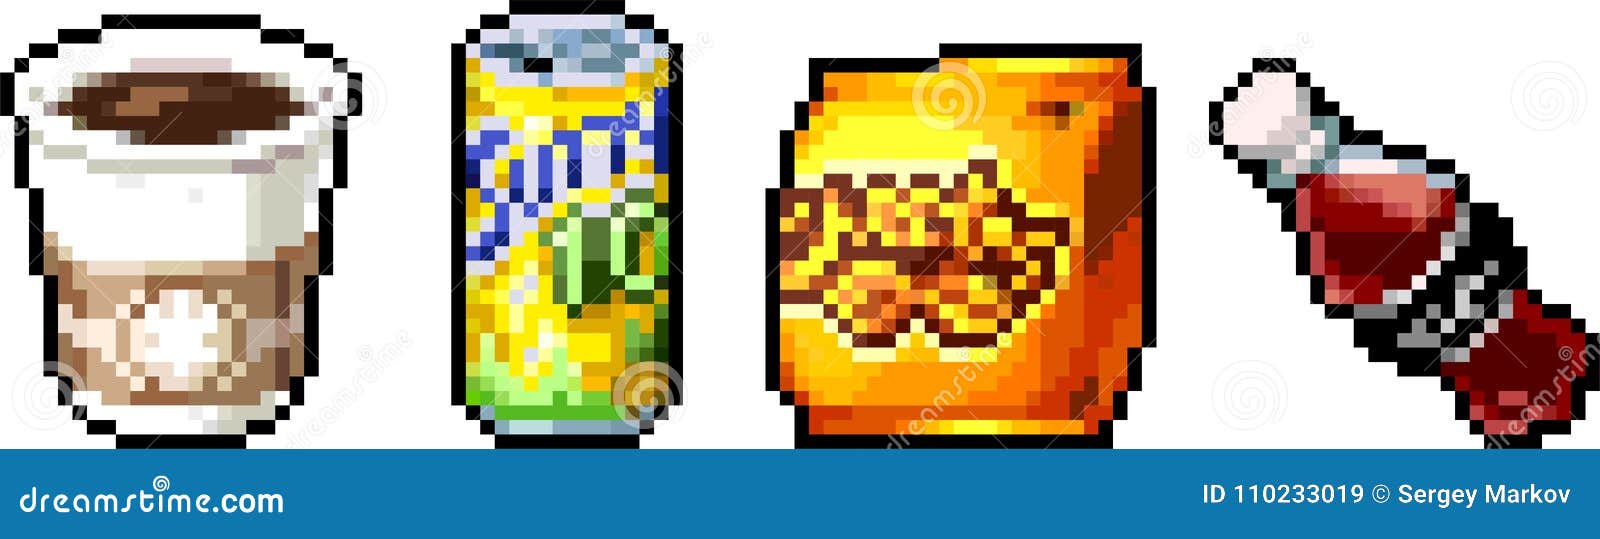 Set Of Food Icons In Pixel Style Stock Vector Illustration